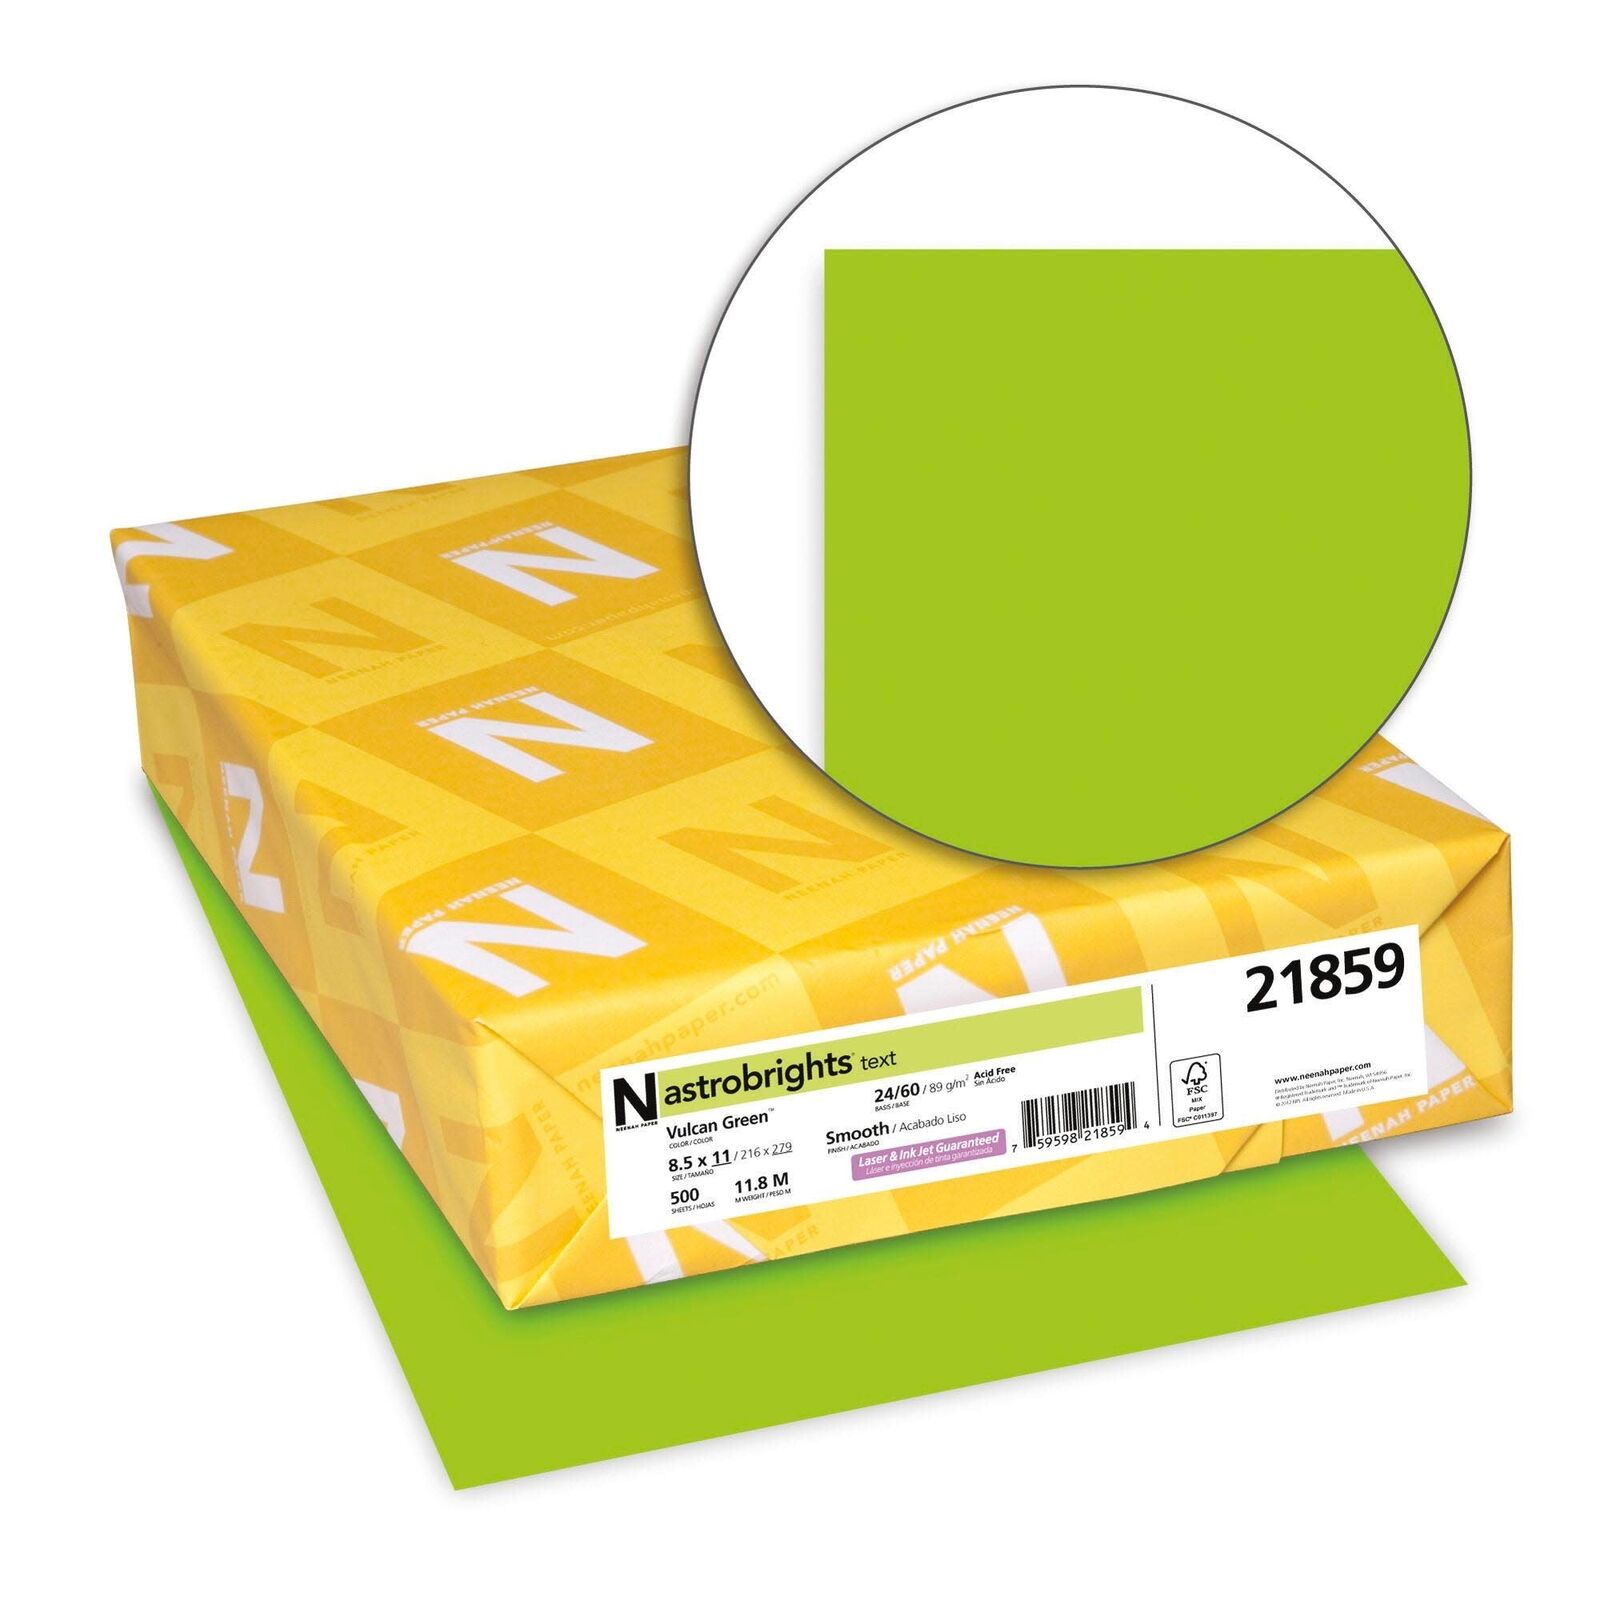 Astrobrights Colored Paper, 8-1/2 x 11 Inches, 24 lb, Vulcan Green, 500 Sheets